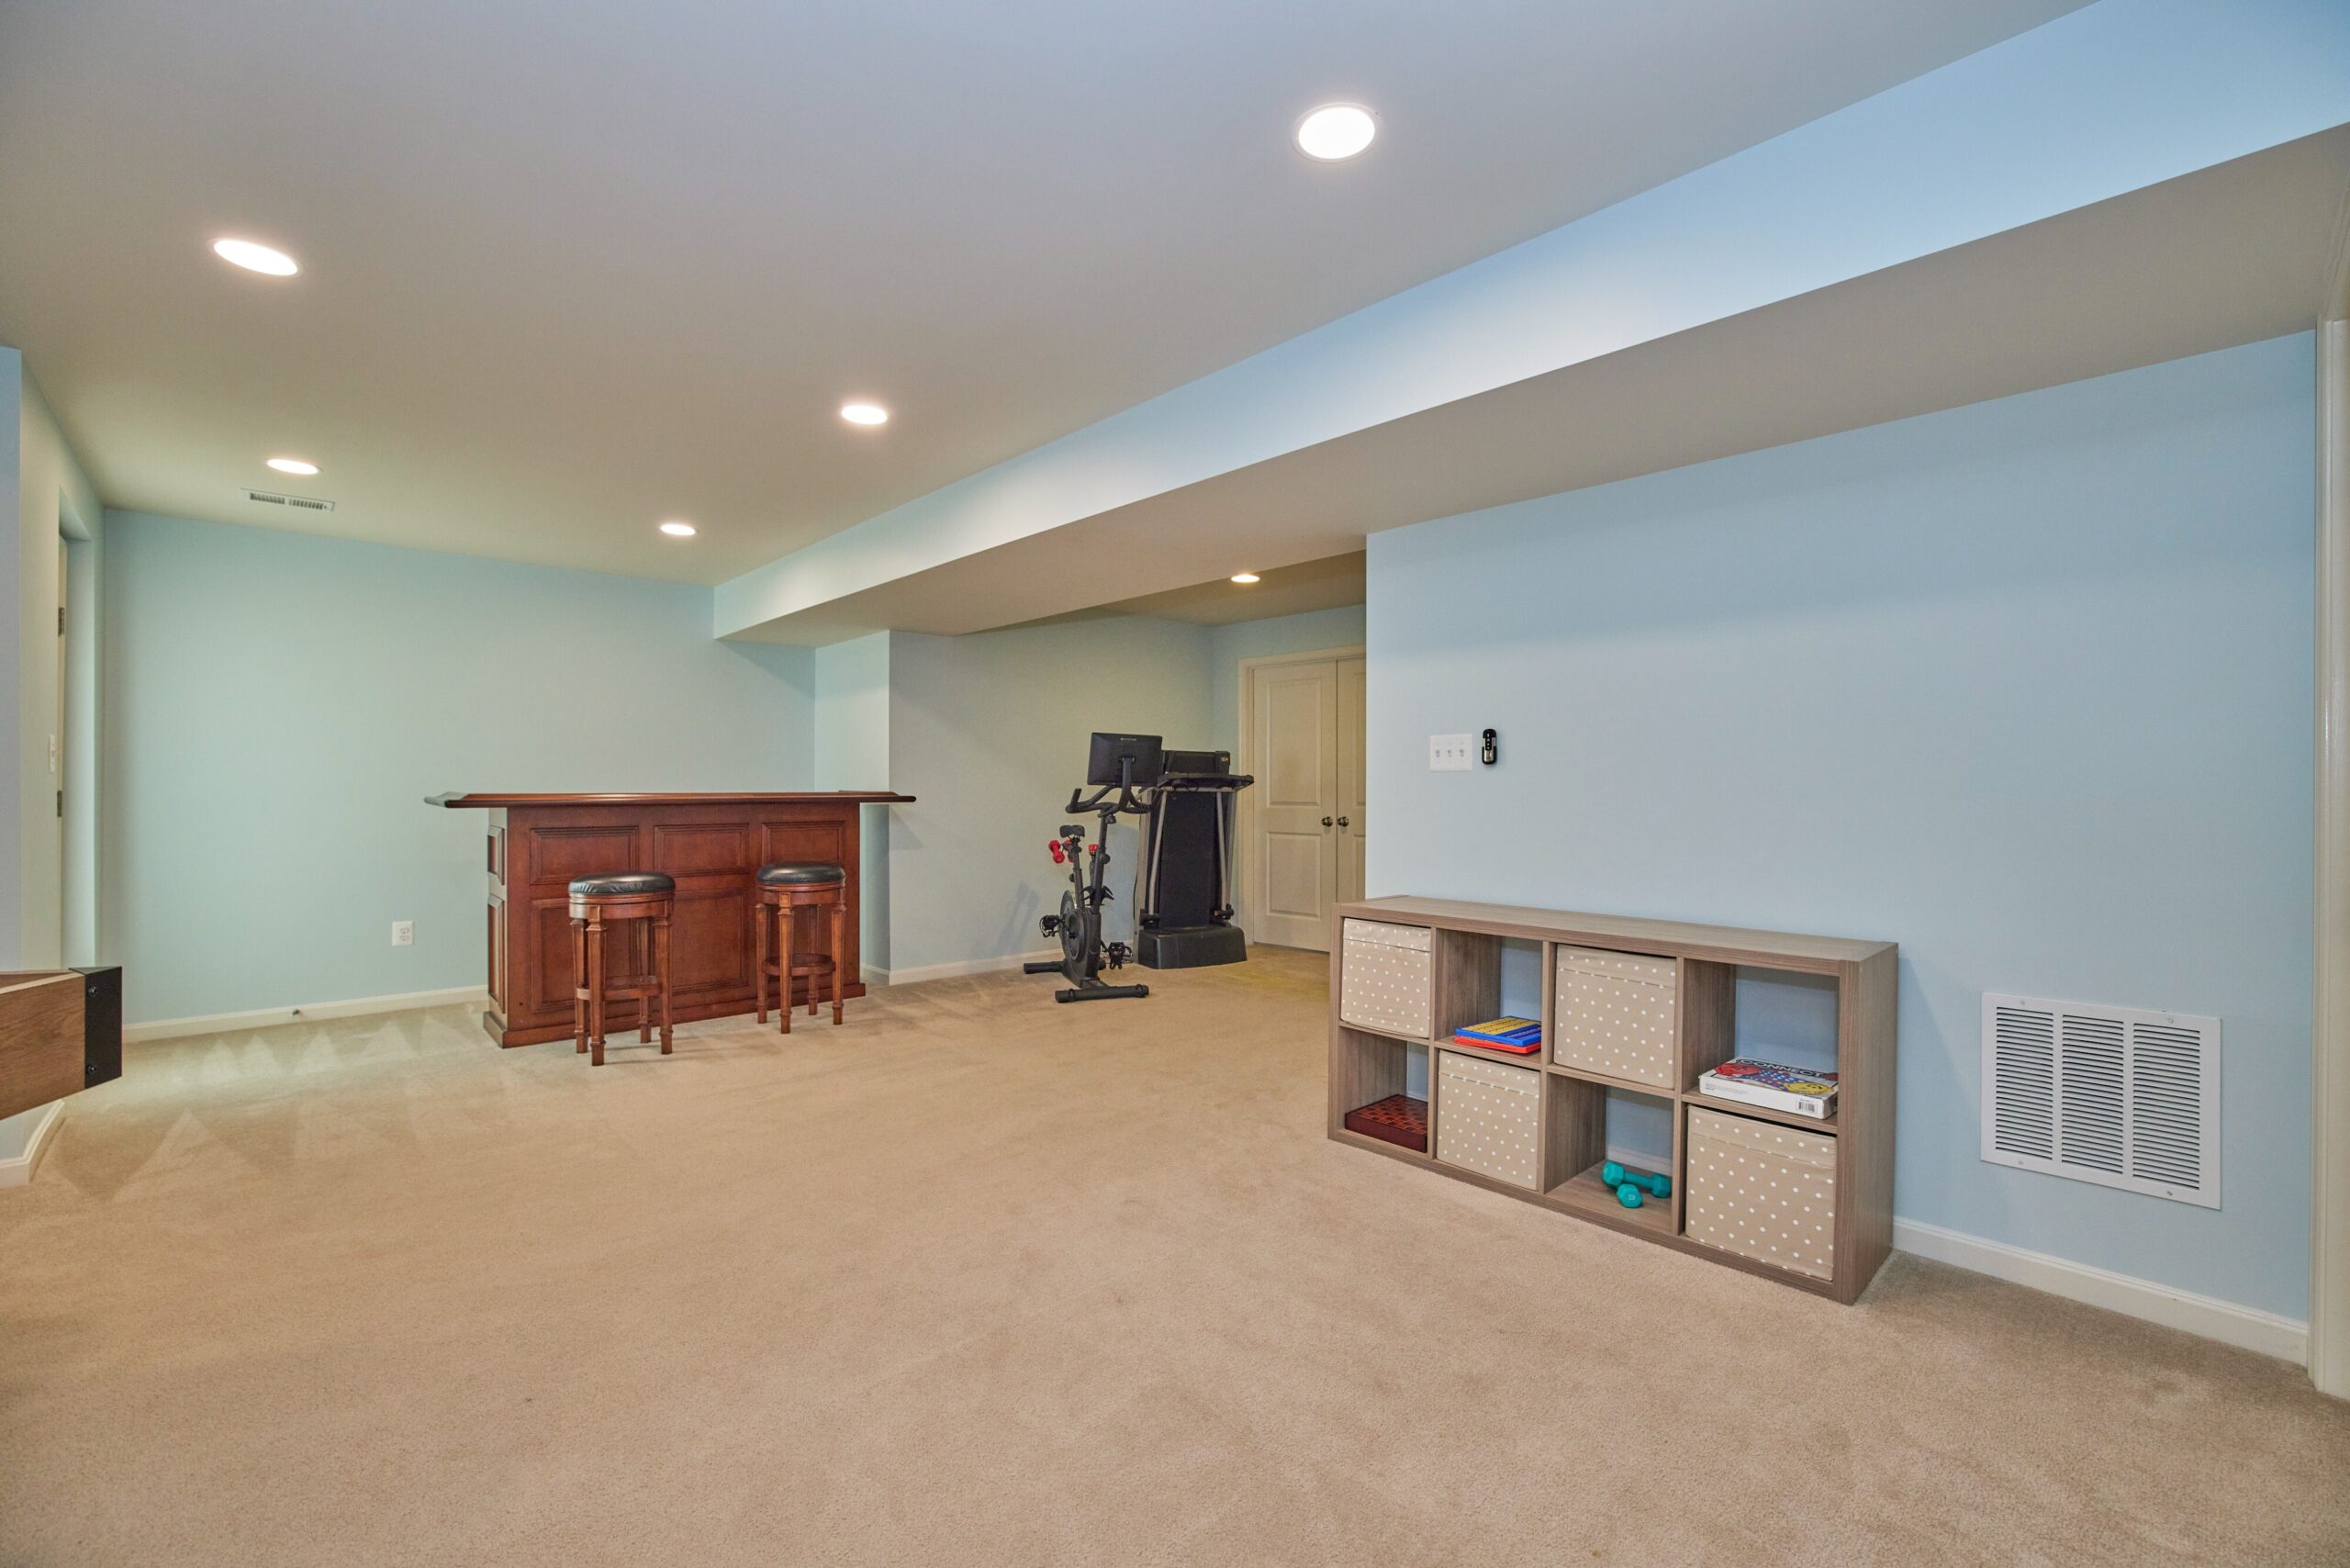 Professional interior photo of 12030 Lake Dorian Drive, Bristow, VA - showing the basement with cream carpeting, light blue walls and a built in oak bar in the background